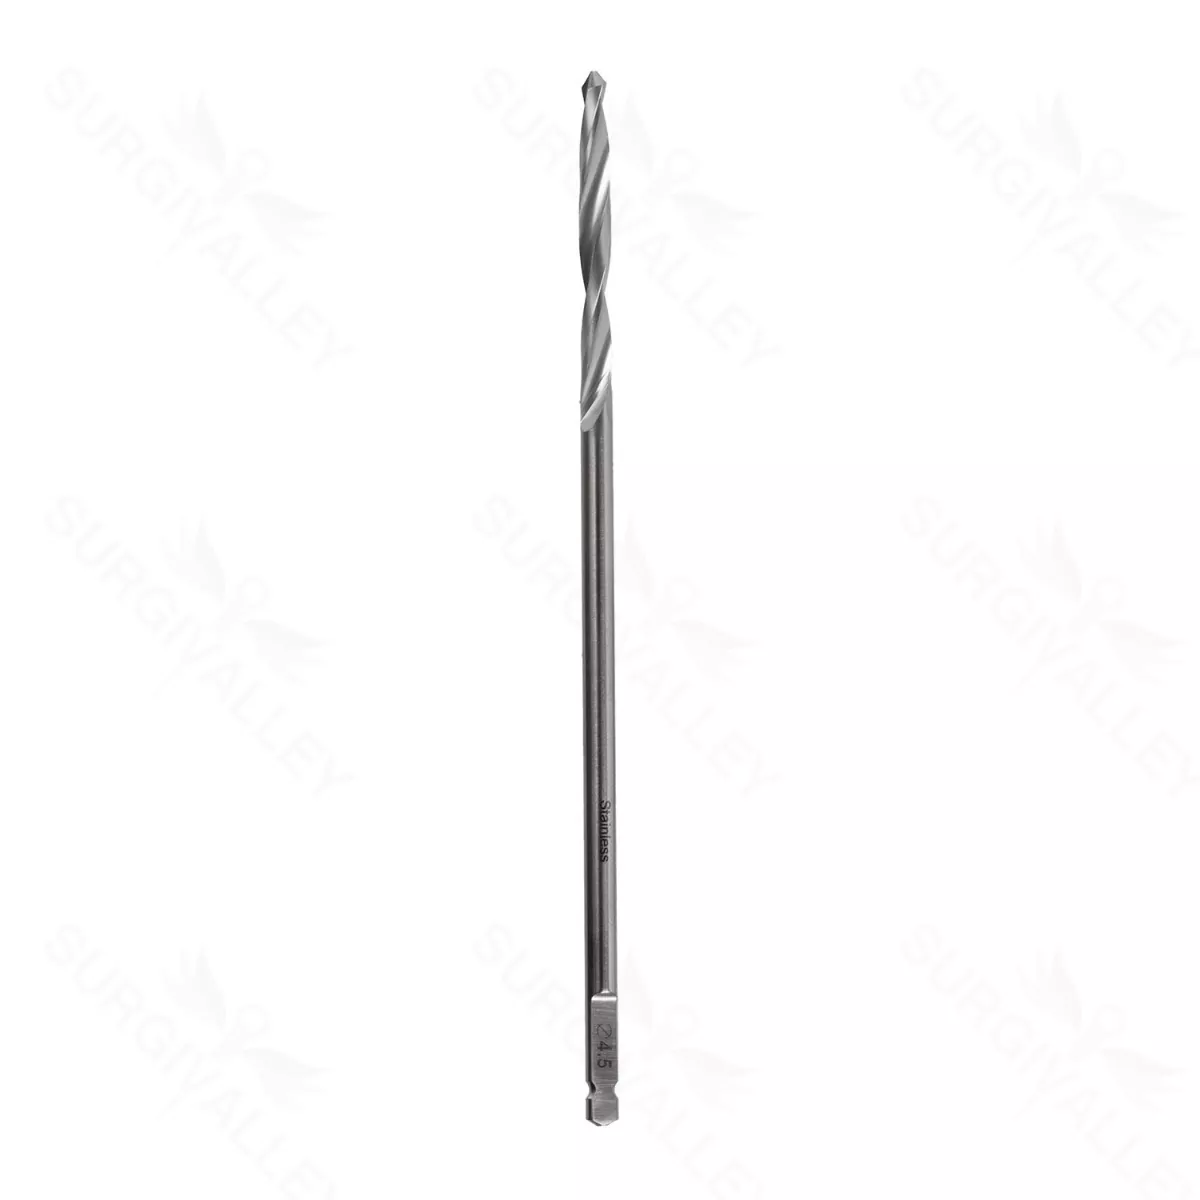 Drill Bit – 4.5mm quick coupling end